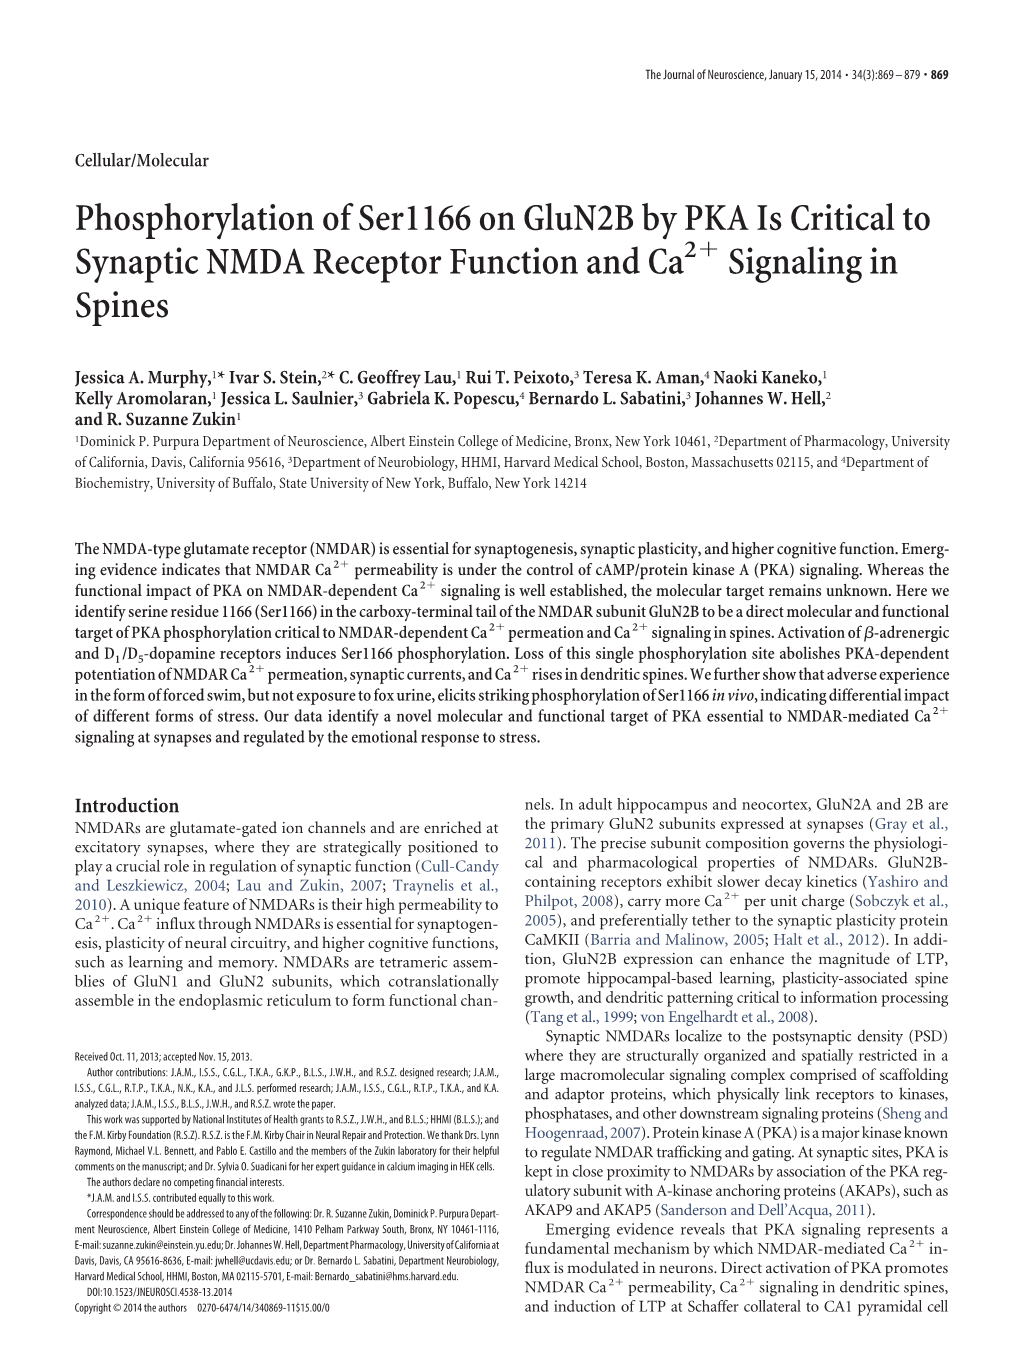 Phosphorylation of Ser1166 on Glun2b by PKA Is Critical to Synaptic NMDA Receptor Function and Ca2ϩ Signaling in Spines